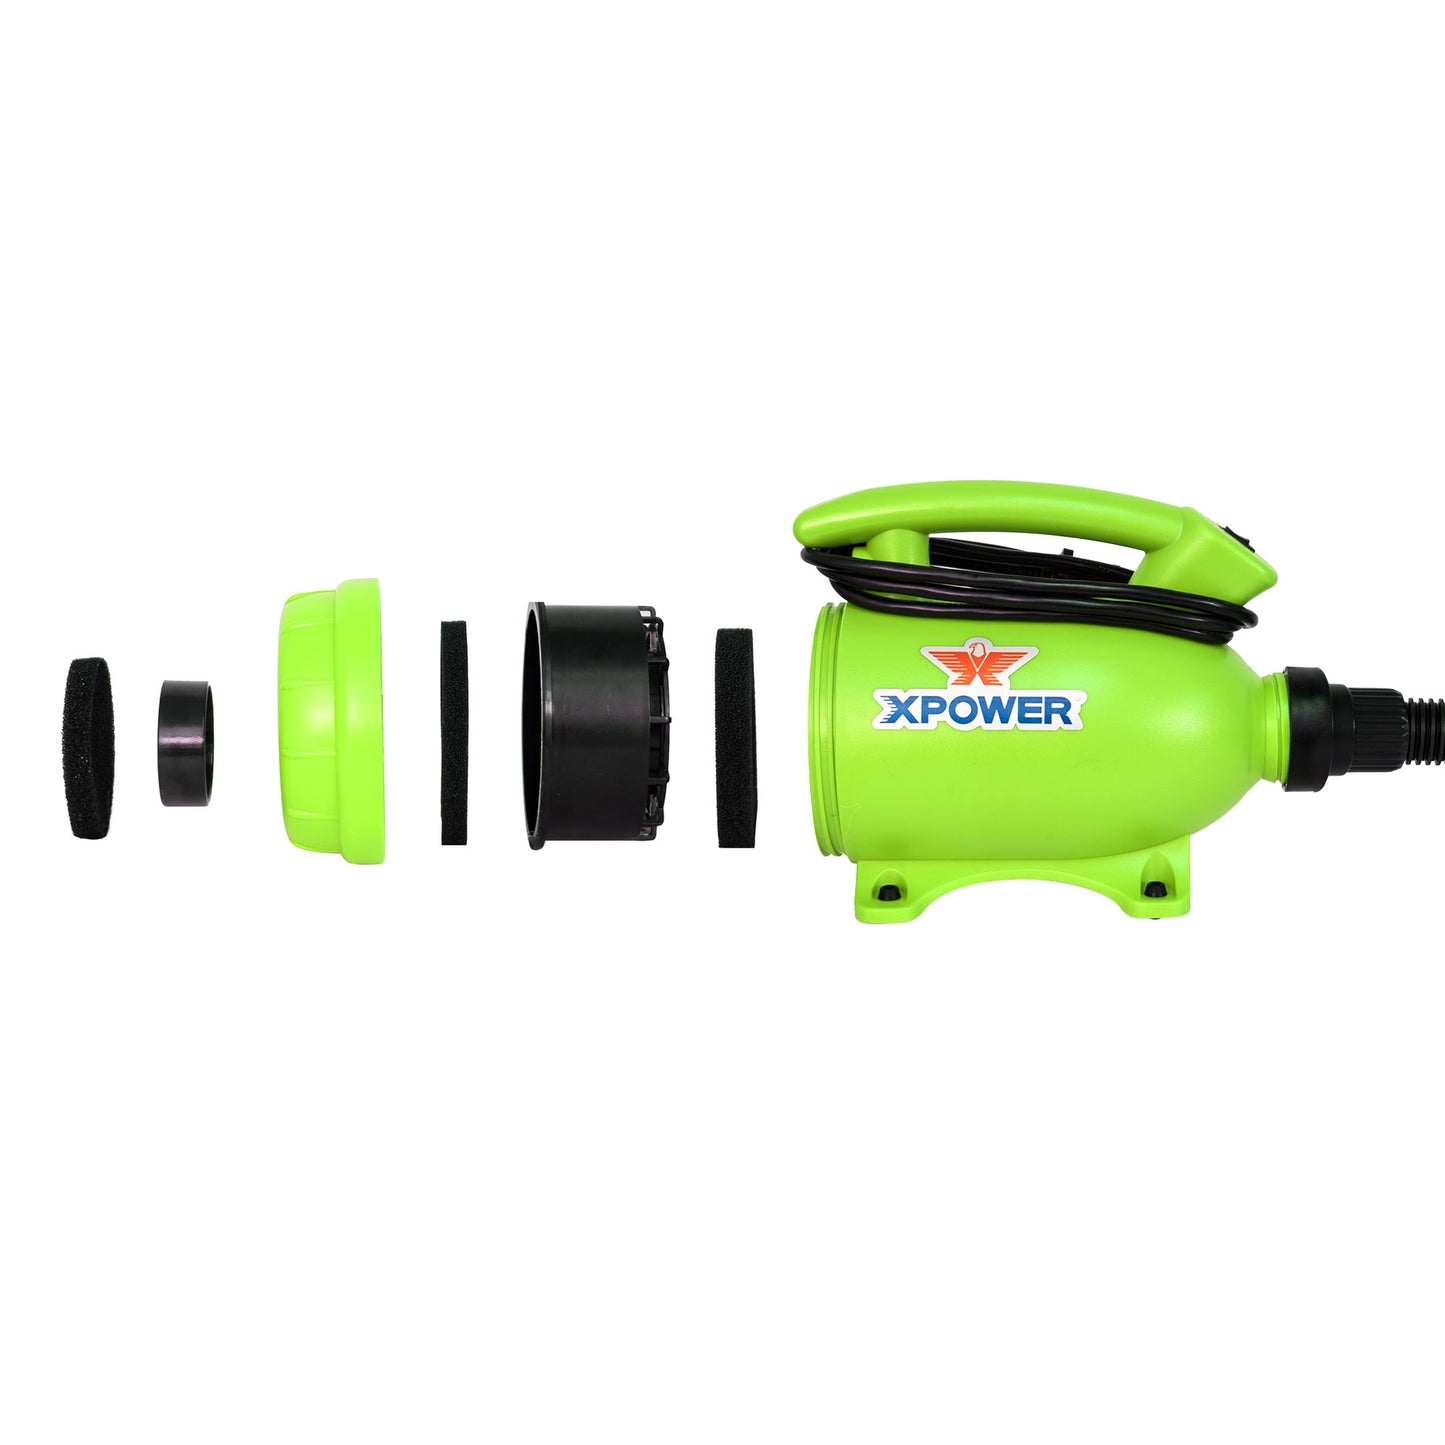 XPOWER B-55 Home Pet Dryer with Vacuum Function - Green